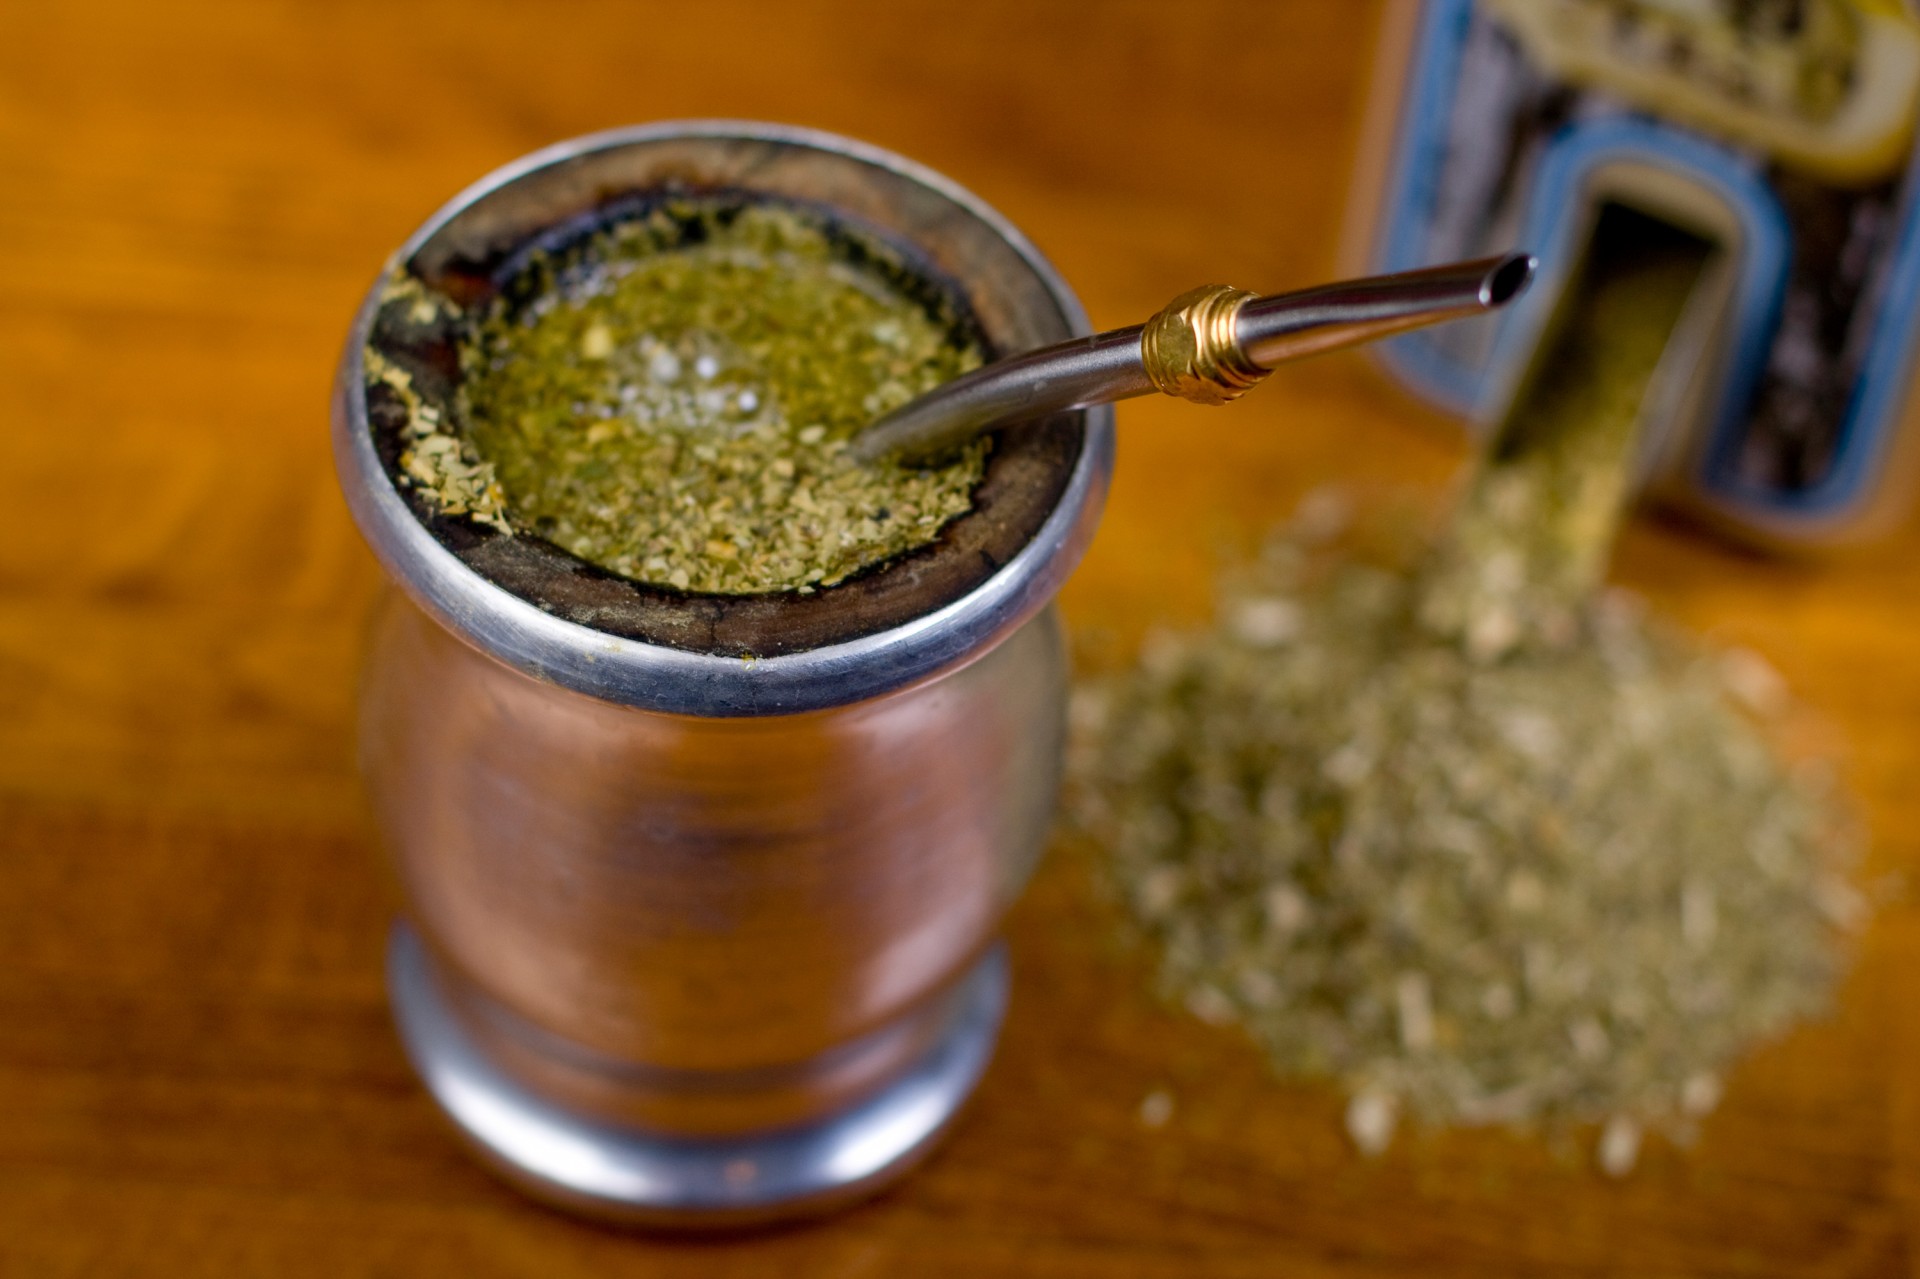 A gourd of yerba mate. Legend has it that the moon gifted this infusion to the Guaraní people of South America. Photo: iStockphoto